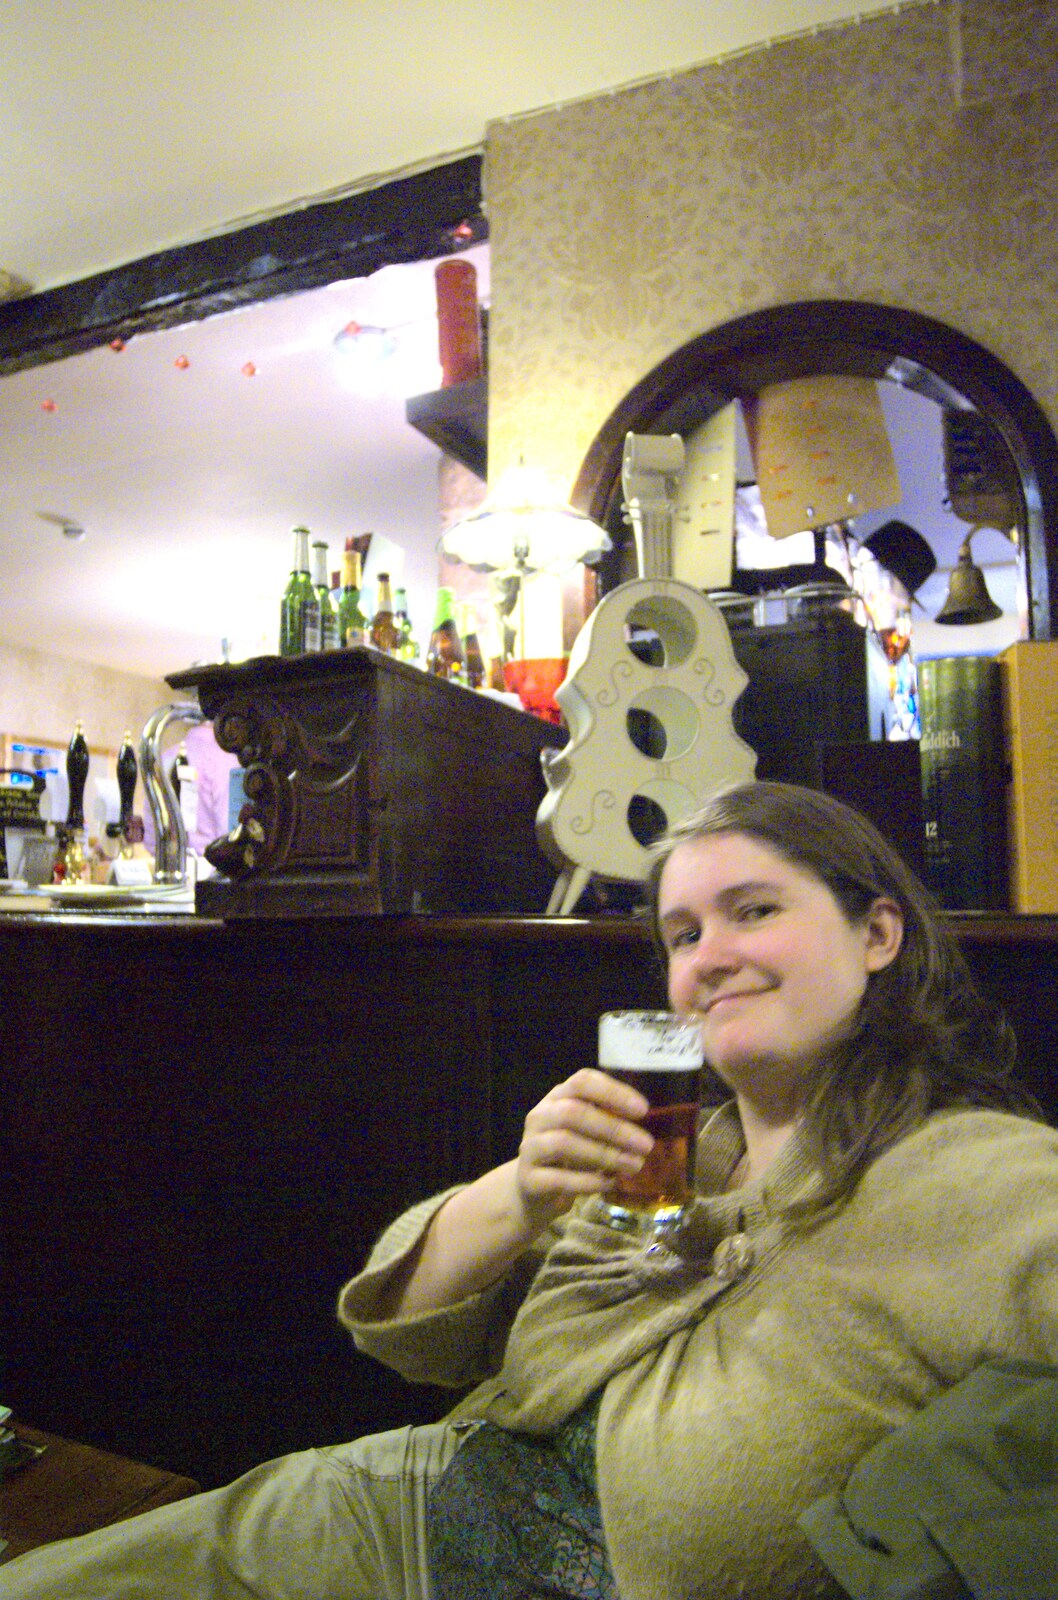 Isobel has a beer from Easter in Chagford and Hoo Meavy, Devon - 3rd April 2010